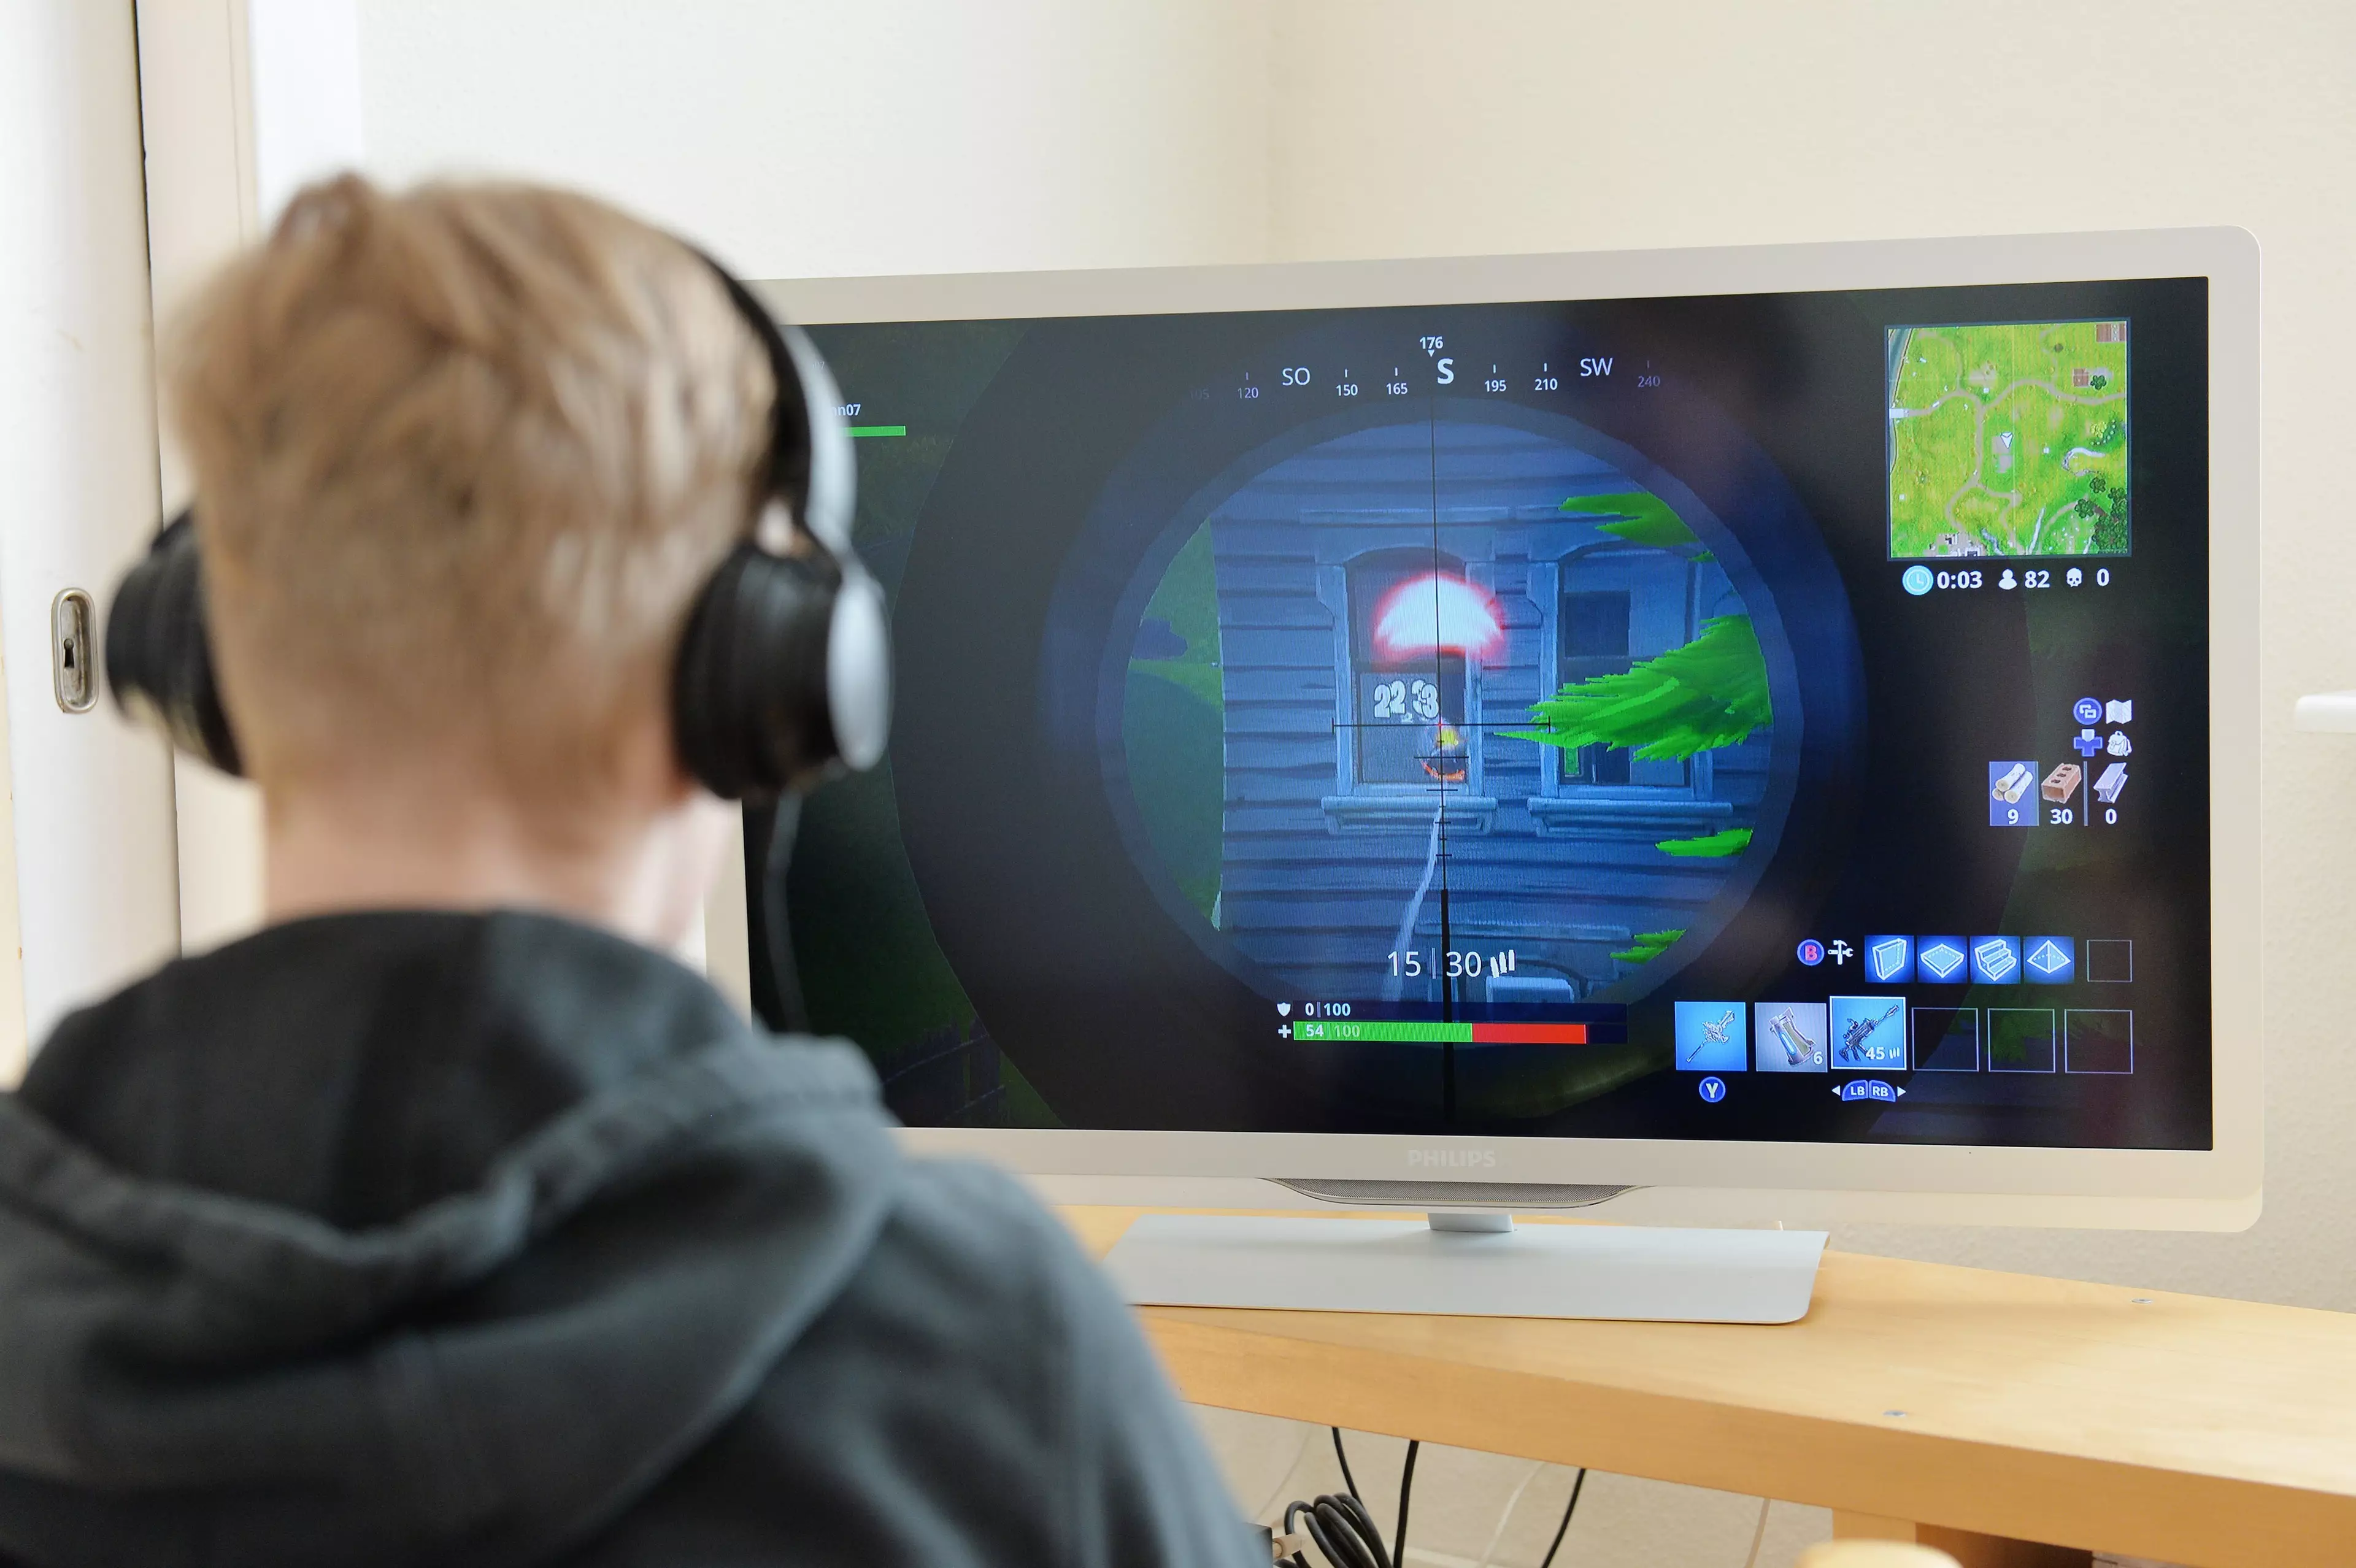 Behaviour Experts Says 'Fortnite' Should Be Banned But Others Say 'Lazy Parenting' Is The Issue